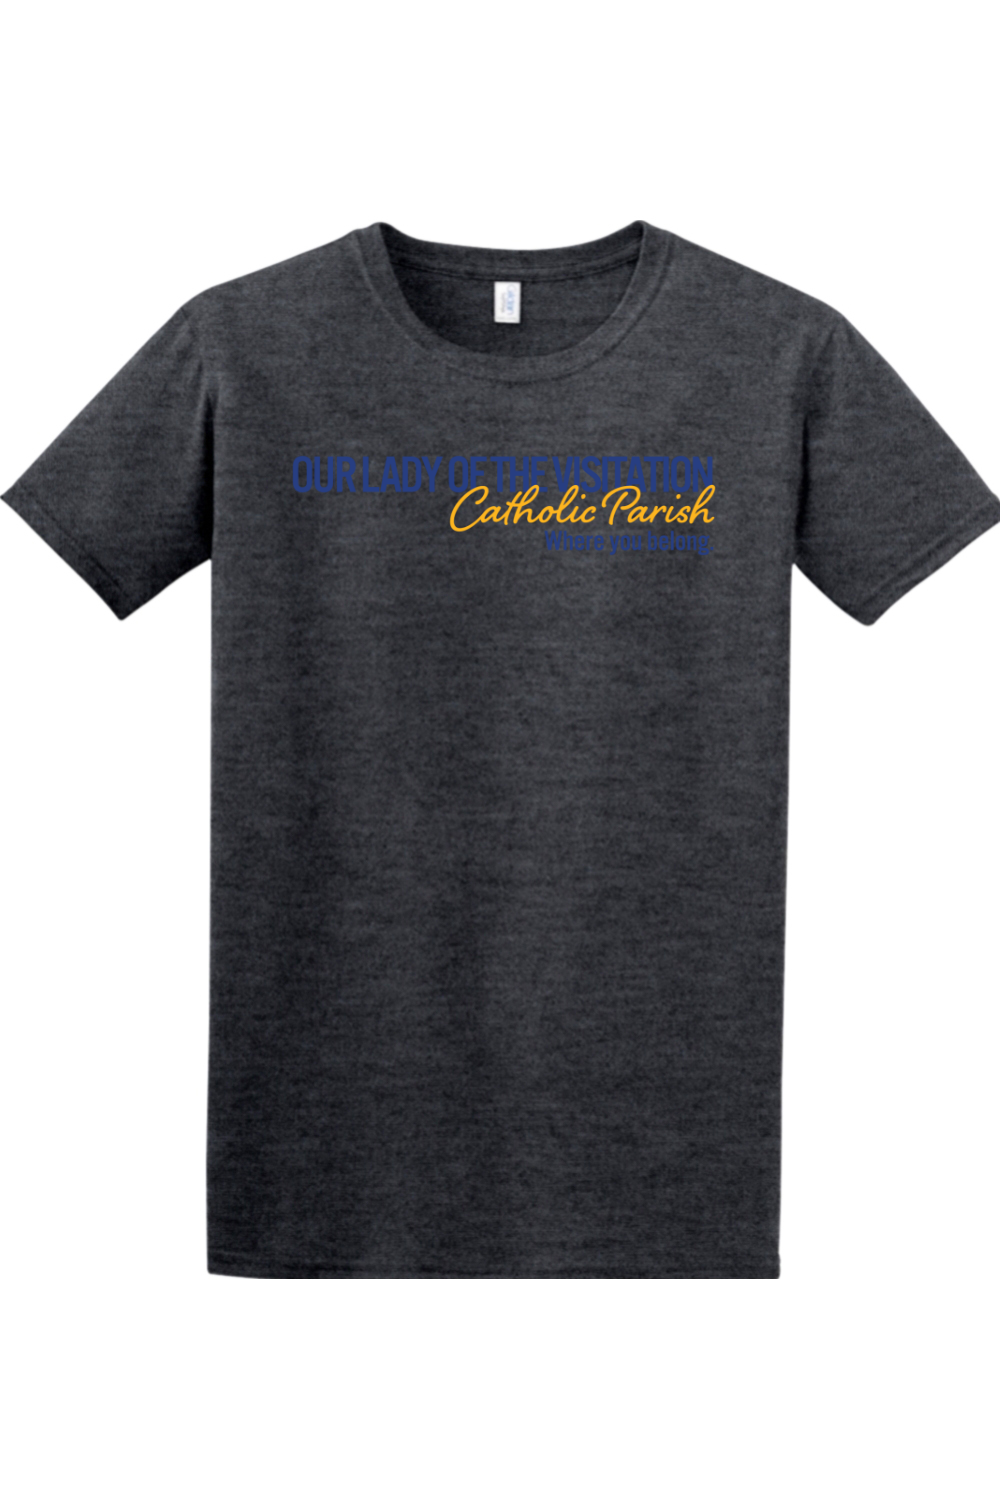 Our Lady of the Visitation Block T-Shirt